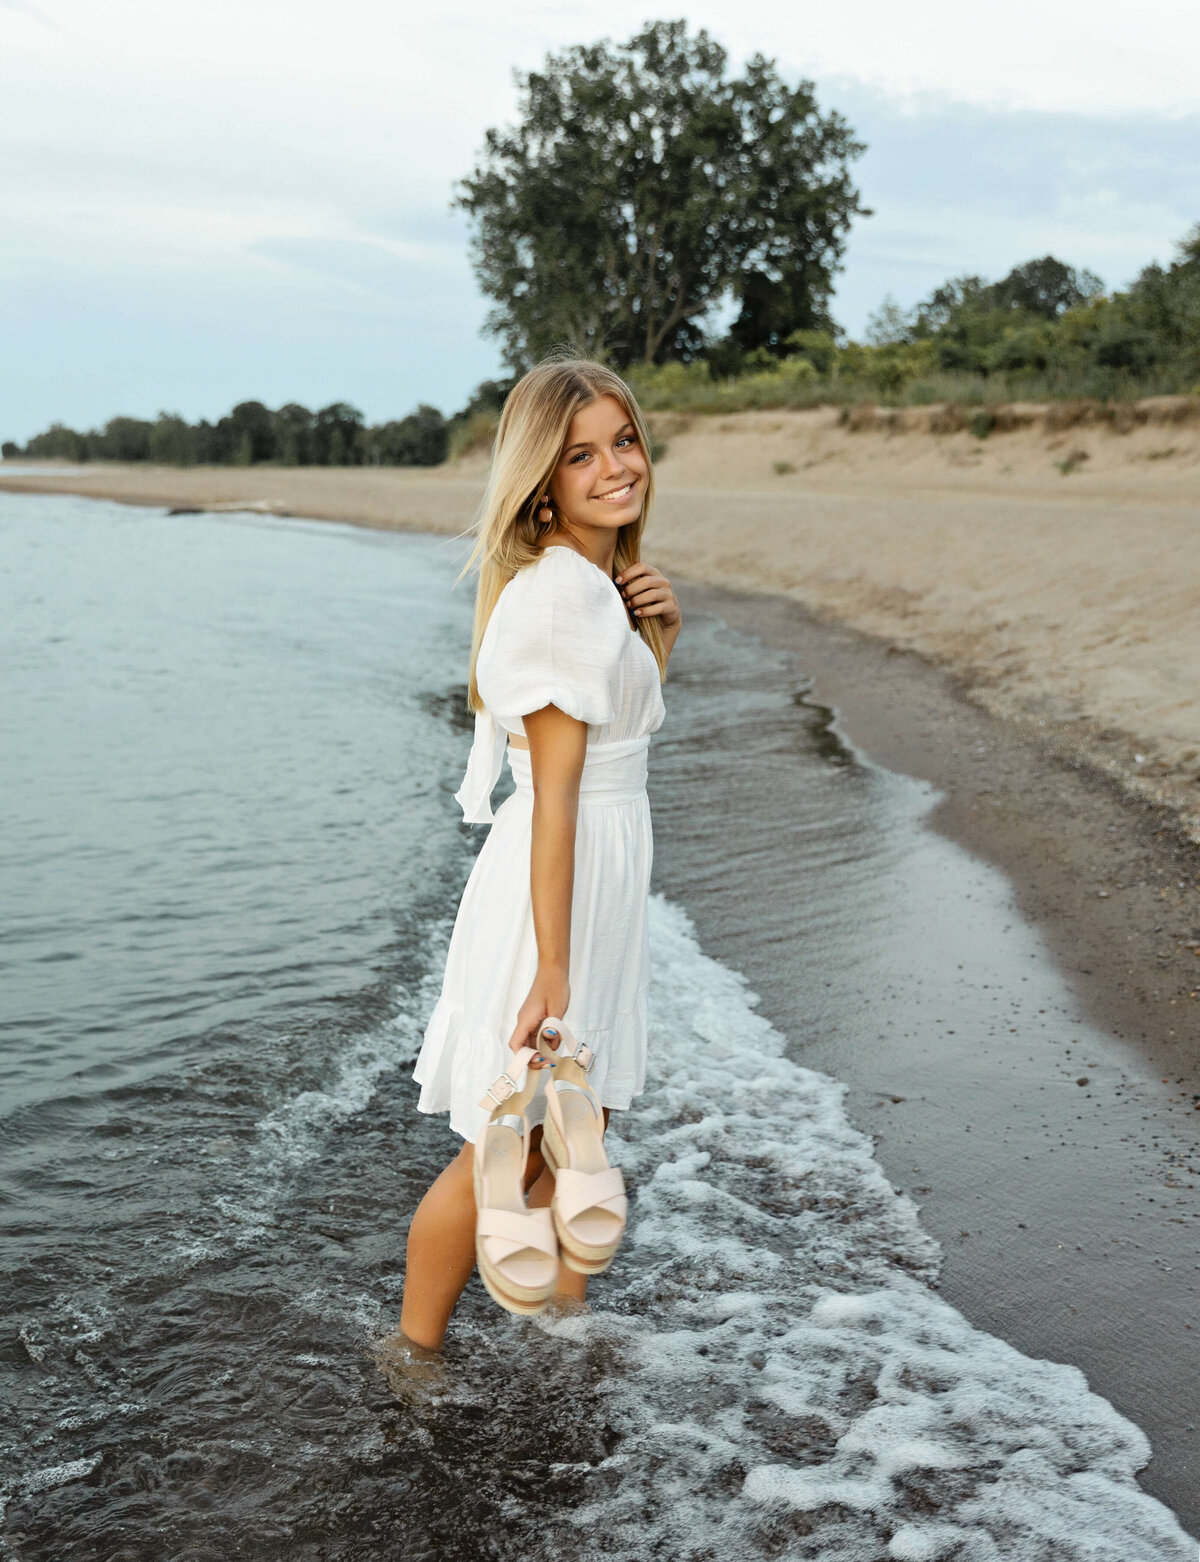 Senior photo of a high school girl standing in the water holding sandals on an Erie Pa beach